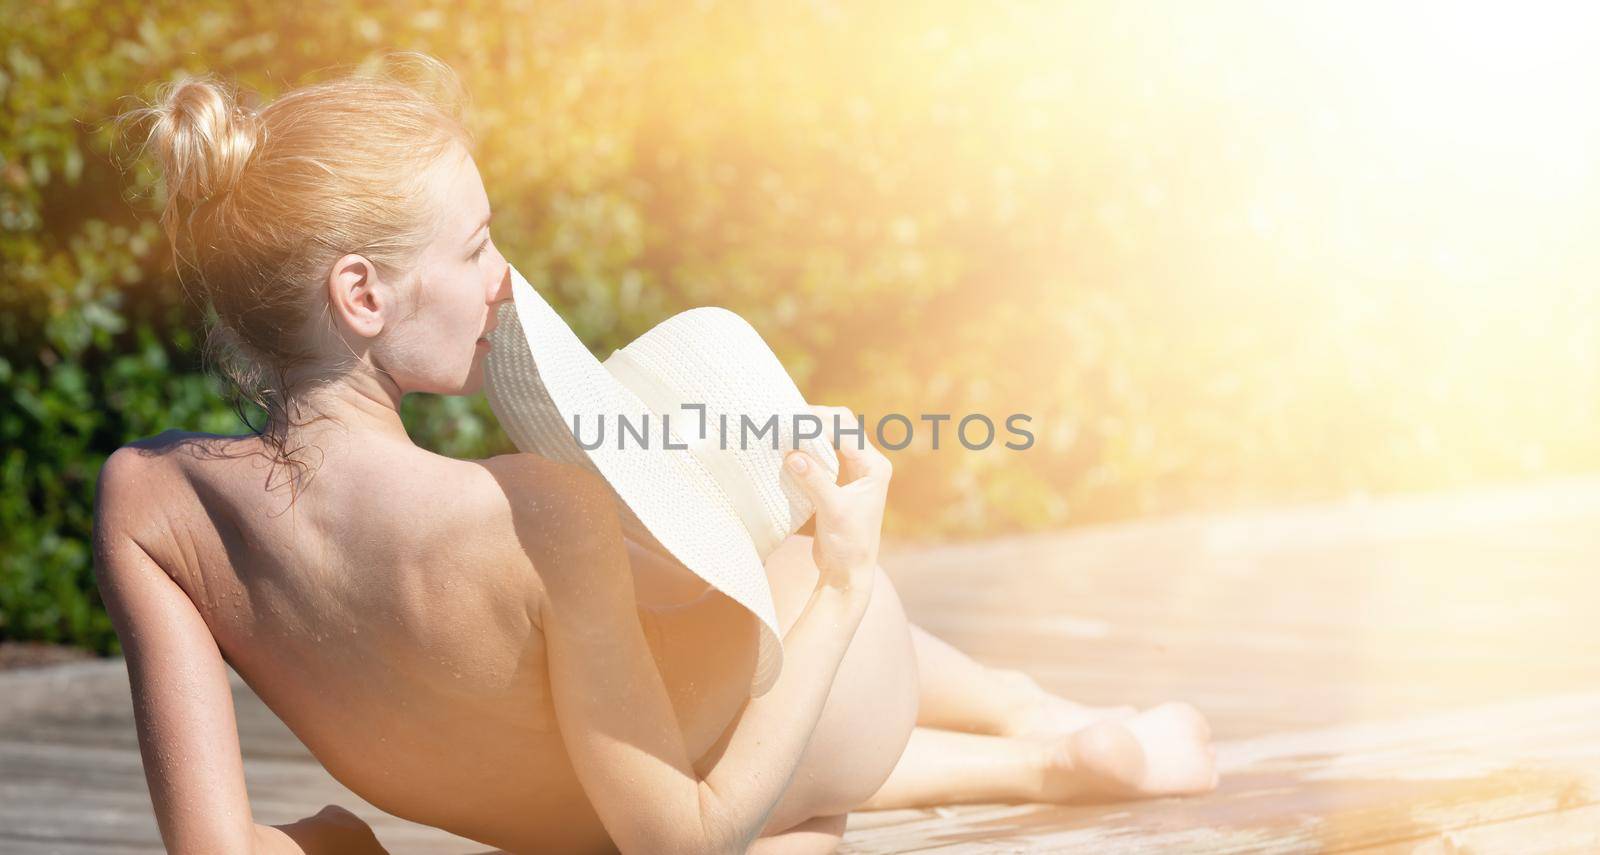 Naked woman outdoors. Beautiful young nude woman in swimming pool. Young nude blonde rests on the wooden side of the outdoor pool by the sea